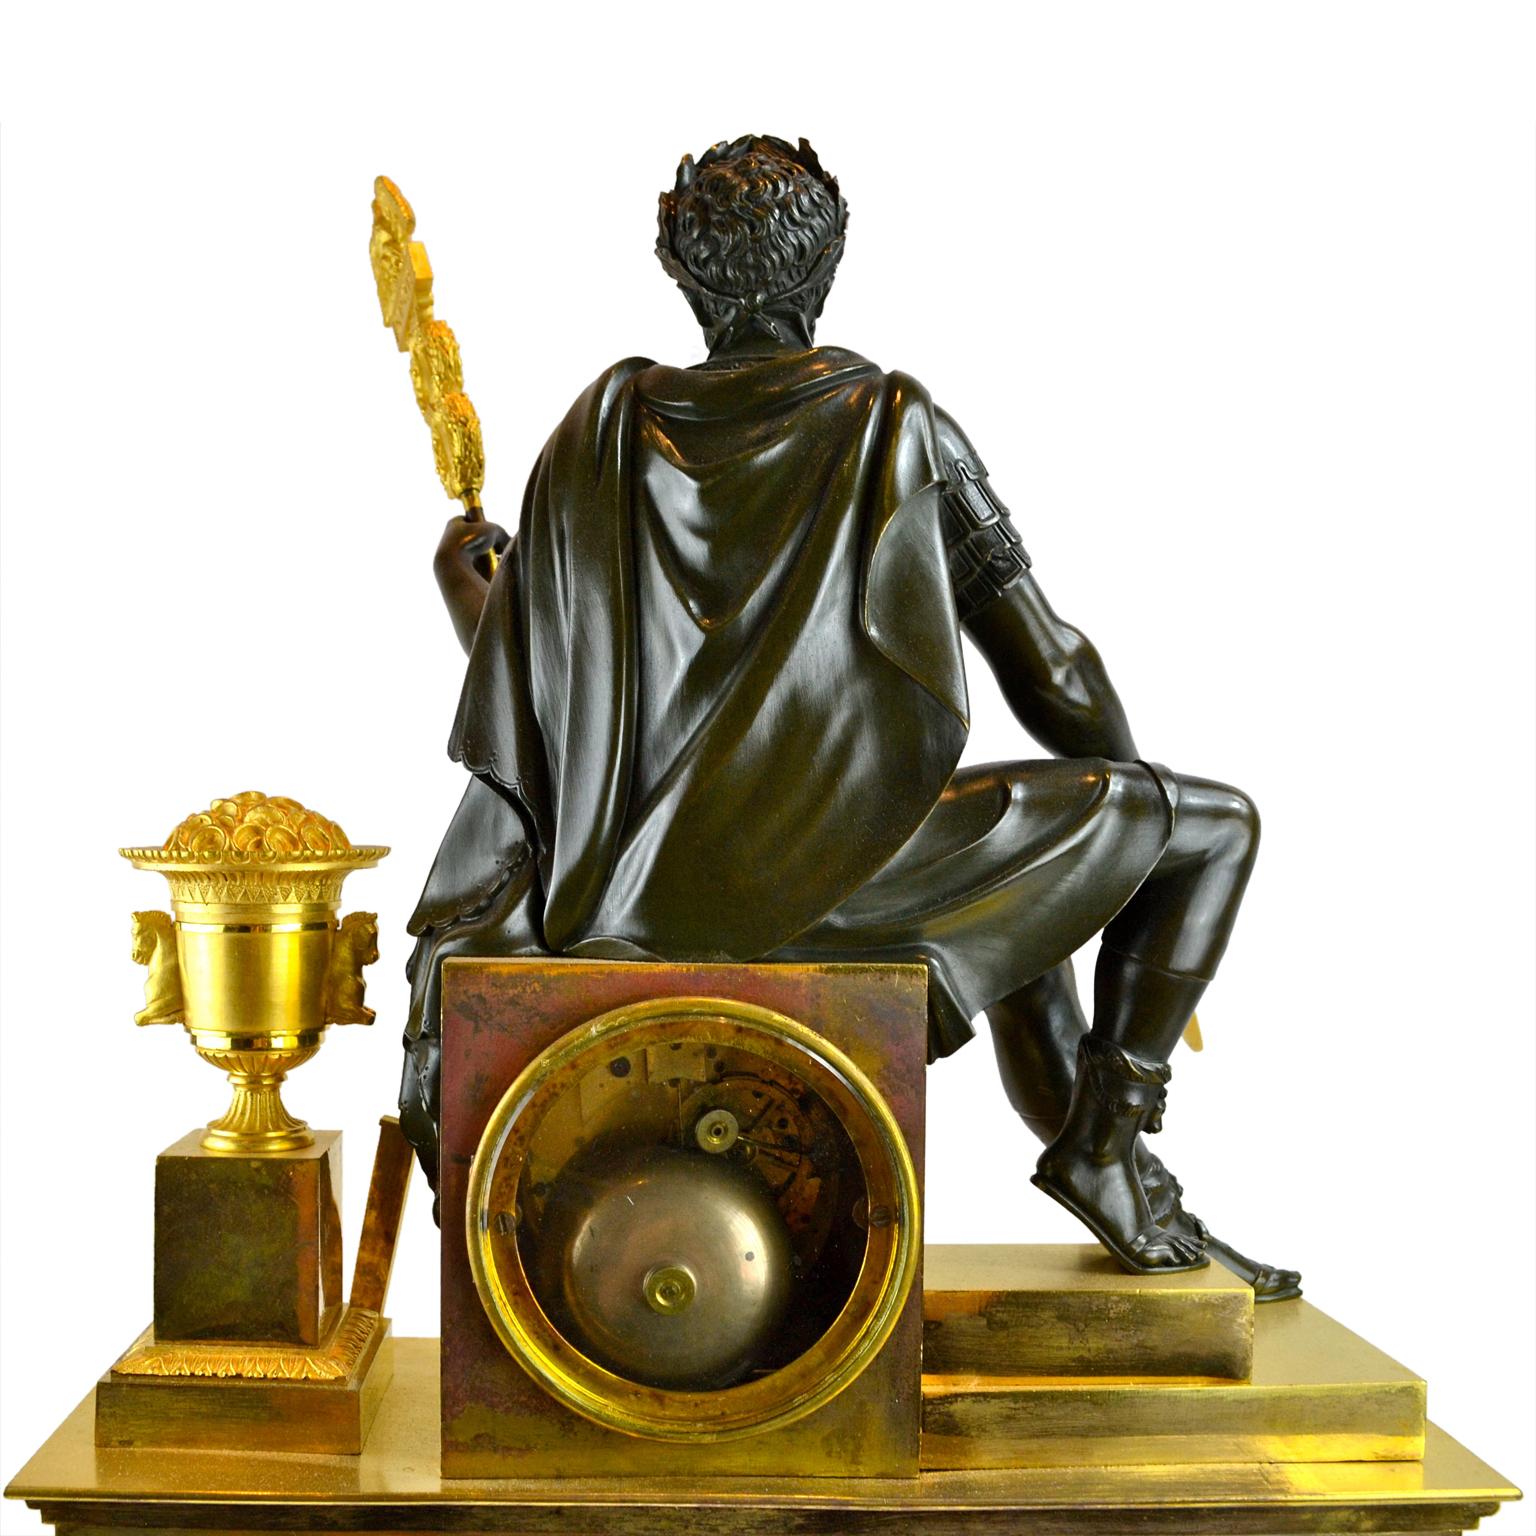 French  Empire Gilt and Patinated Bronze Clock of a Seated Roman Emperor In Good Condition For Sale In Vancouver, British Columbia